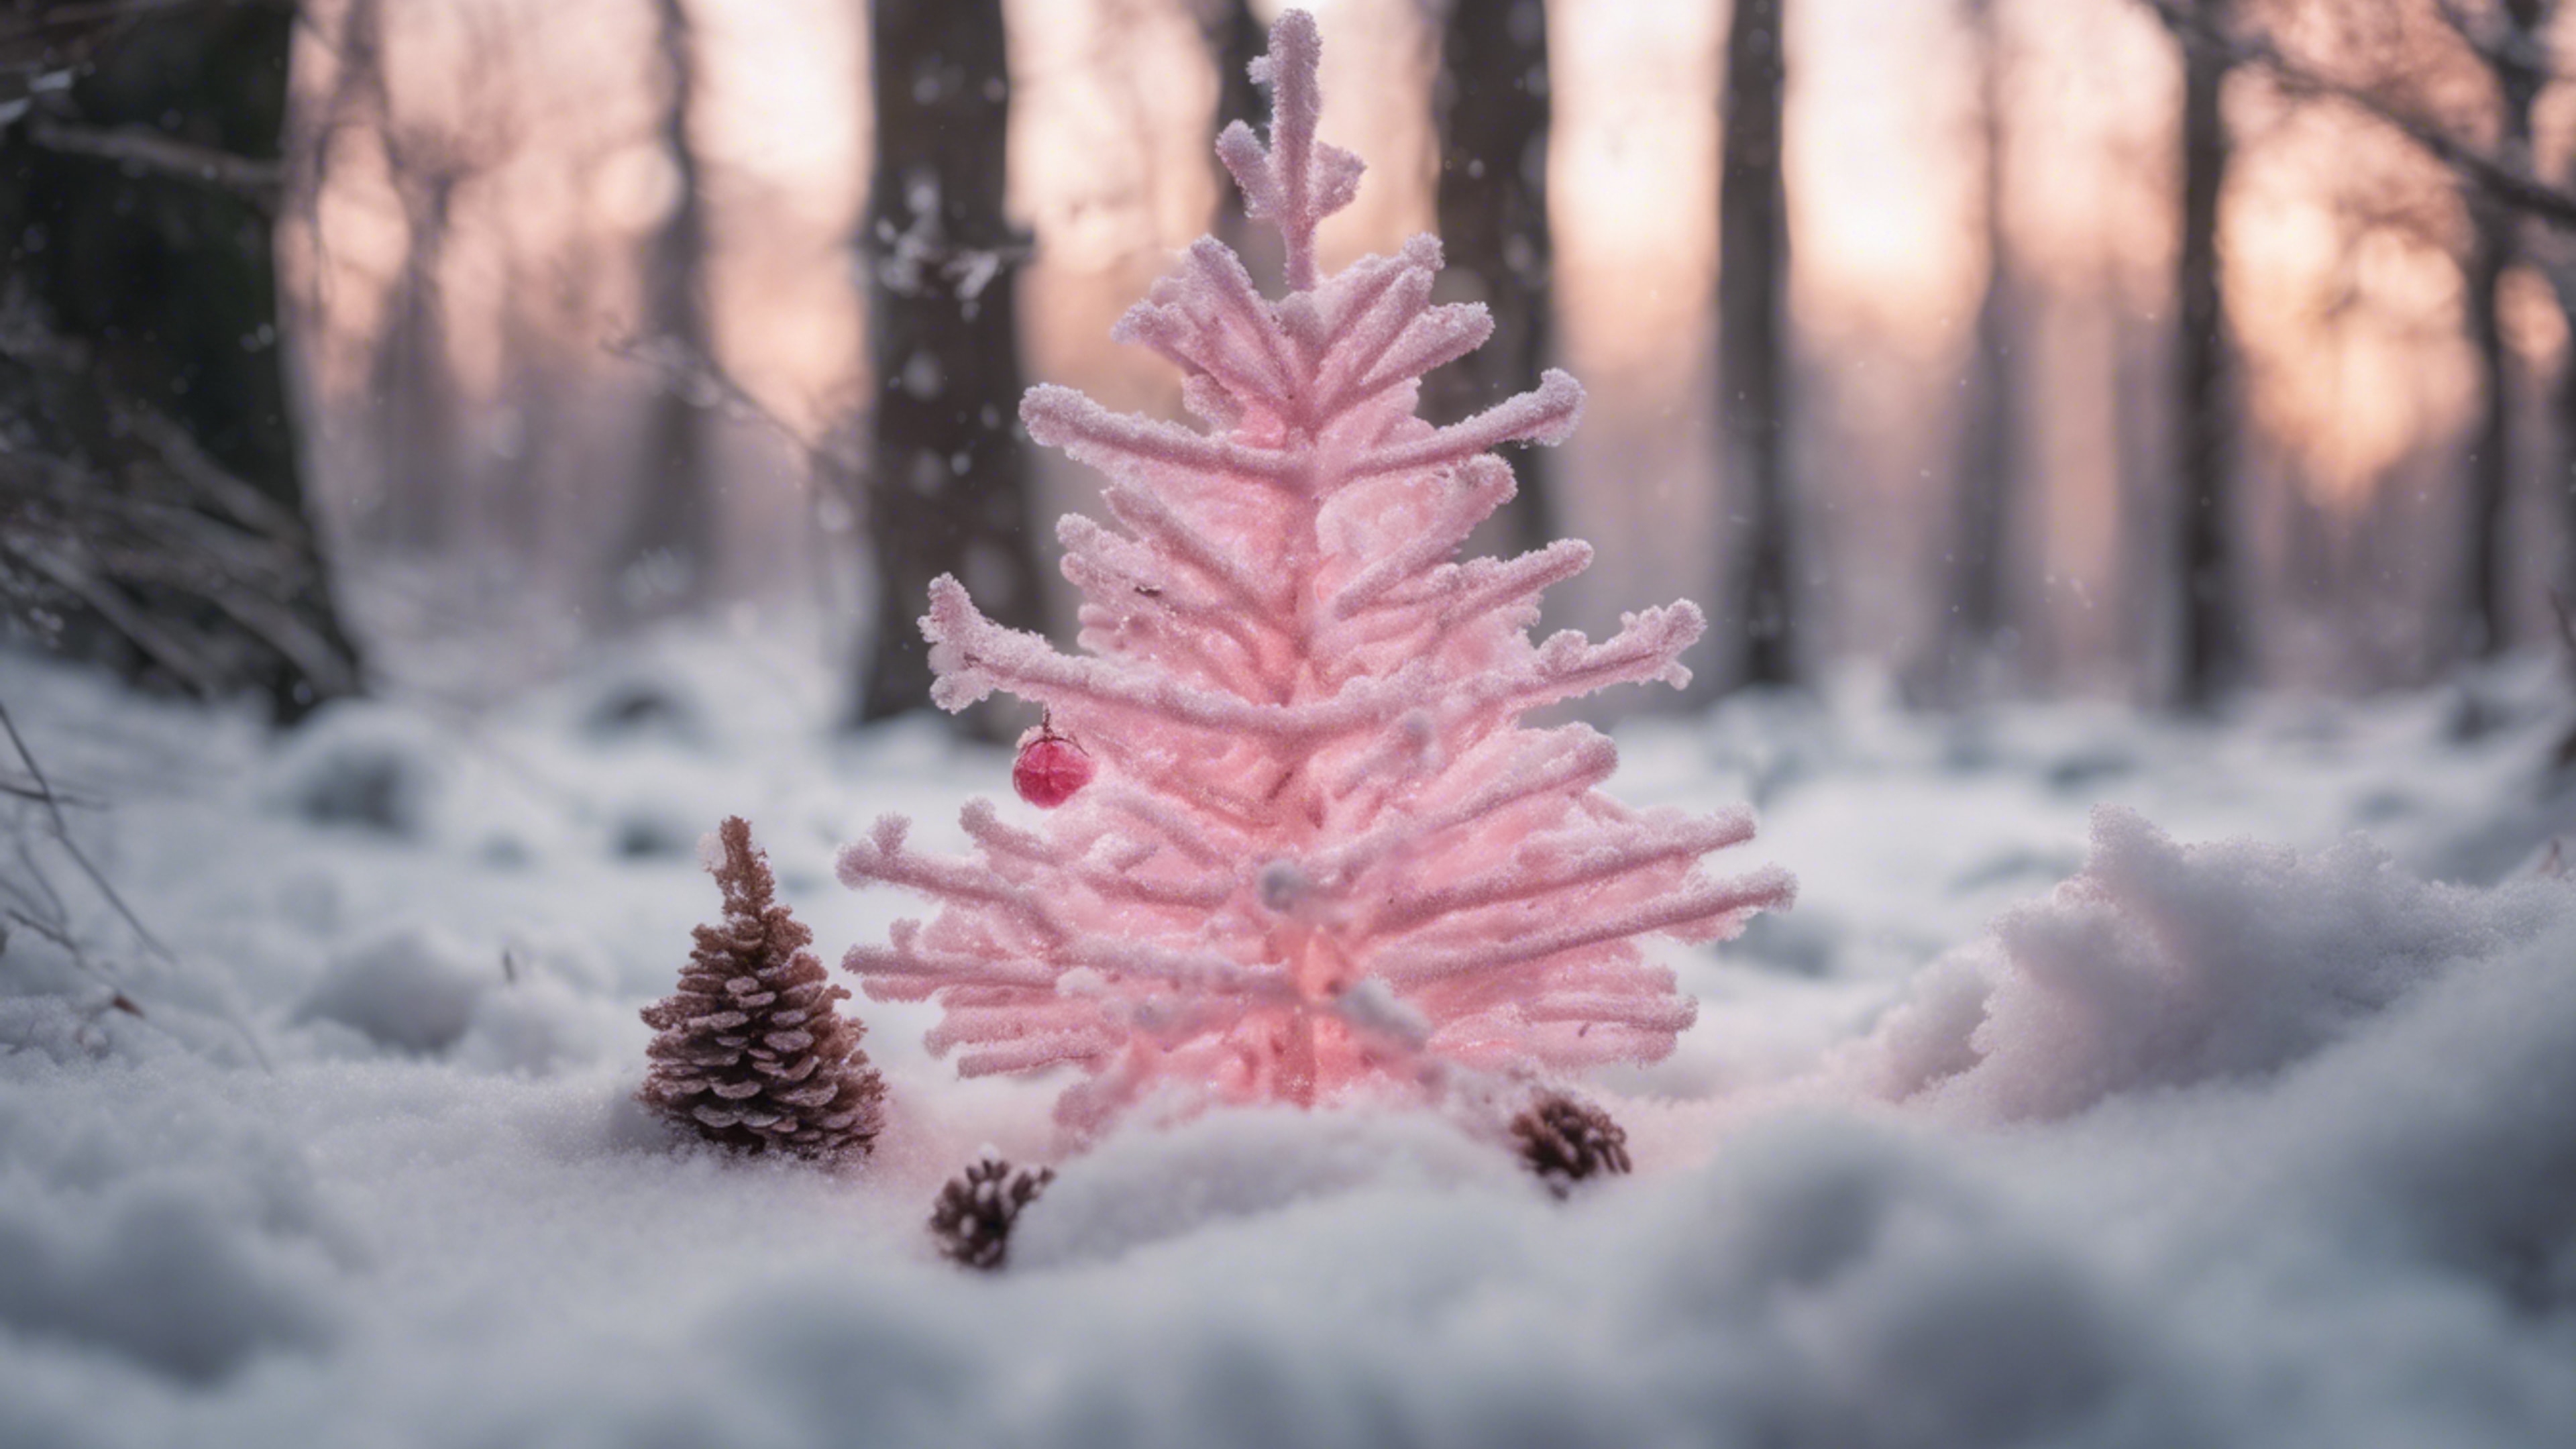 A snowy woodland scene with a pink Christmas angle gracing the foreground. Wallpaper[f9b1e4313f2541d485d1]